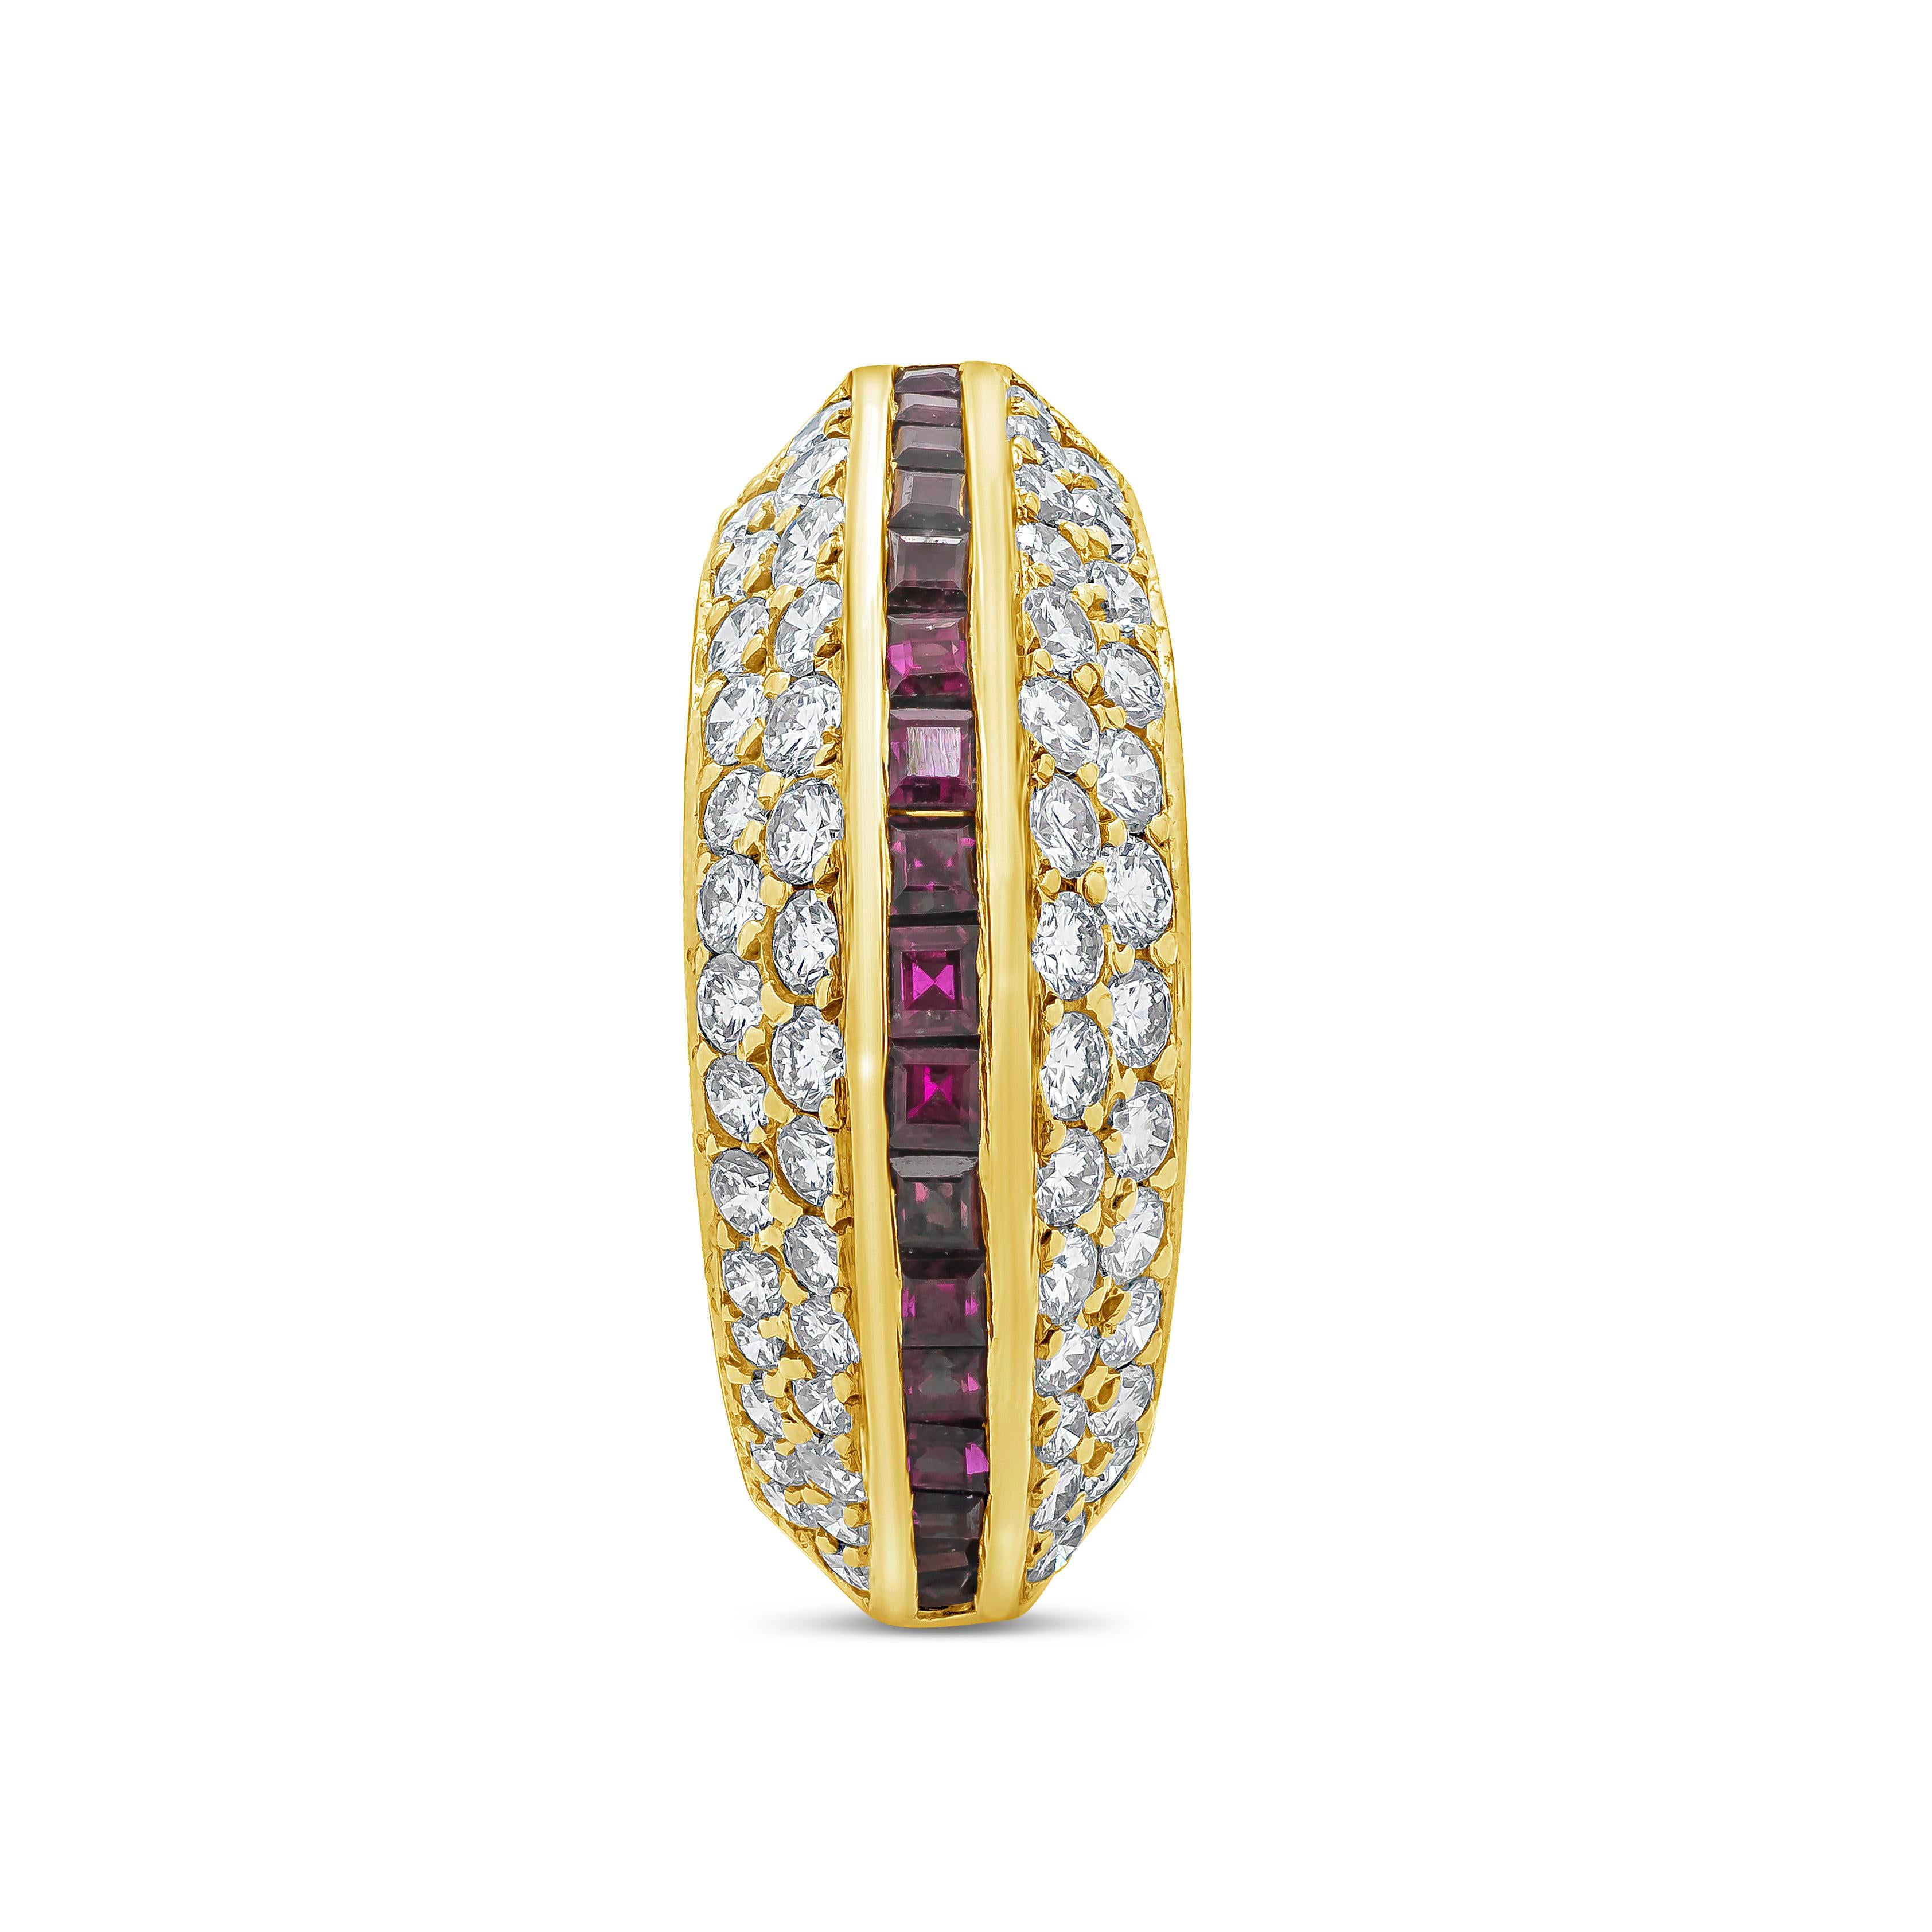 A unique and fashionable ring showcasing a row of square cut ruby, accented with round brilliant diamond set in a domed setting weighing 2.04 carats total. Finely made in 18K Yellow Gold. Size 6.5 US resizable upon request.

Style available in